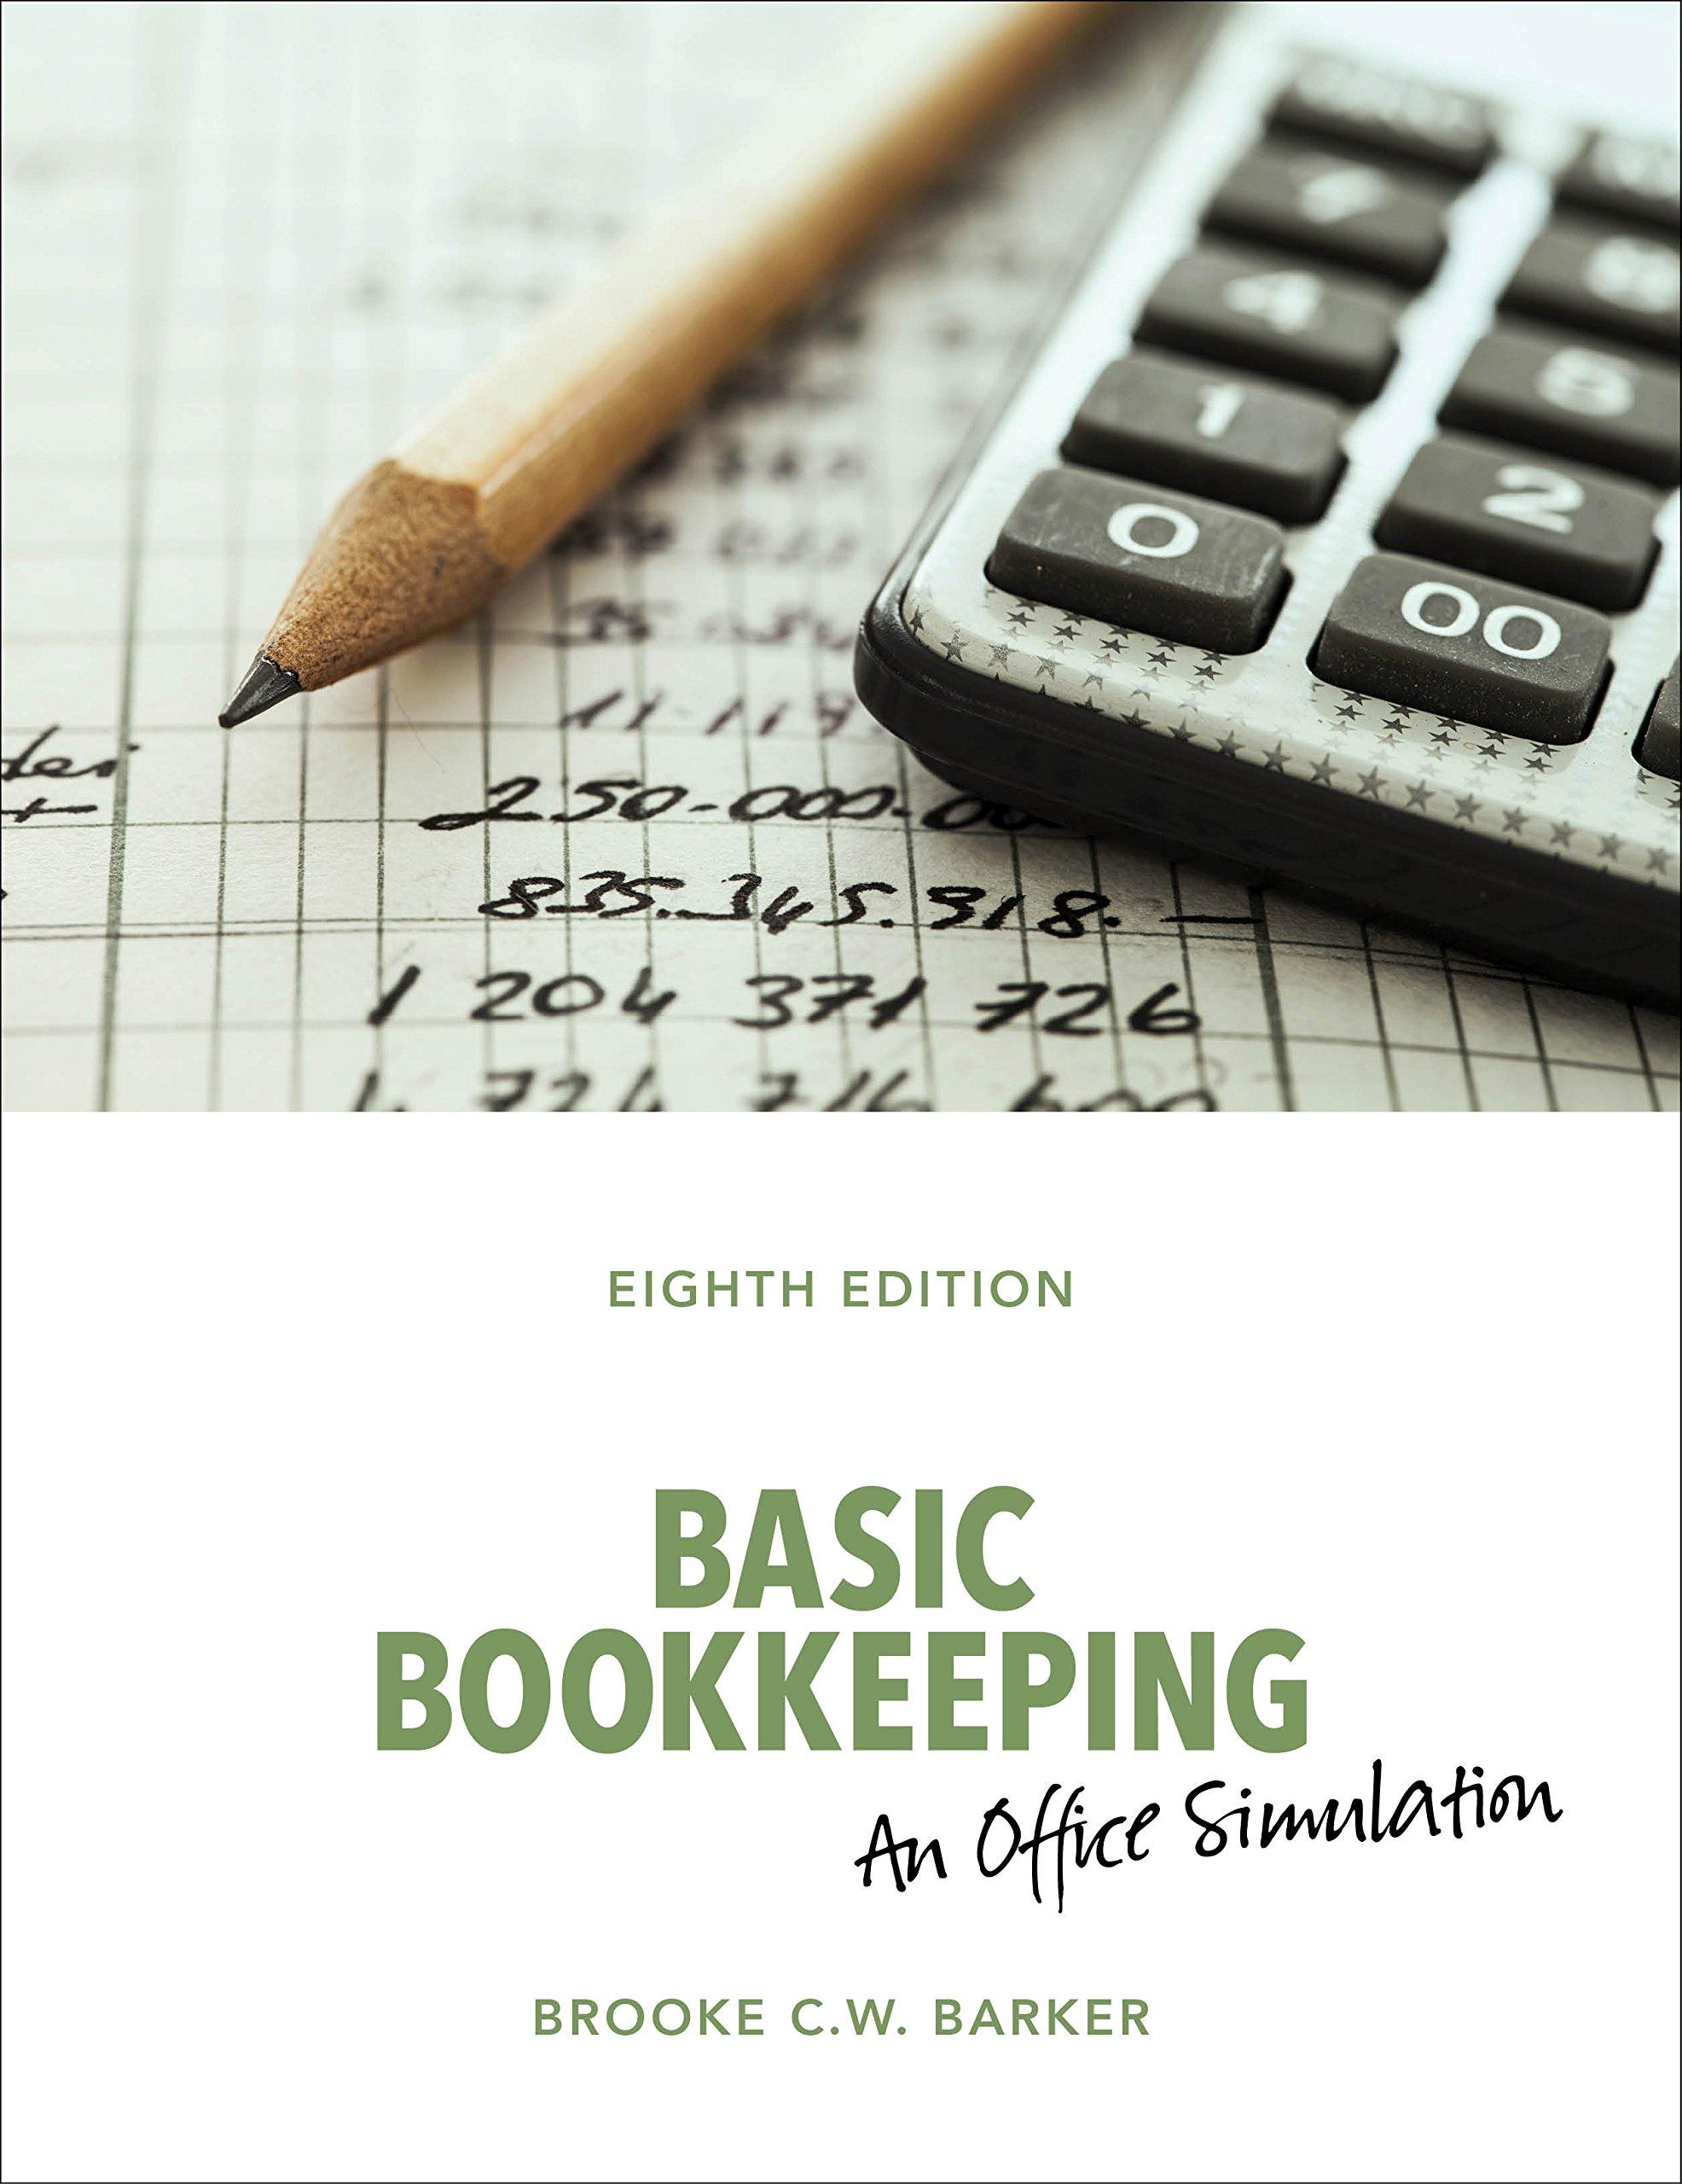 basic bookkeeping an office simulation 8th edition brooke barker 0176721223, 978-0176721220